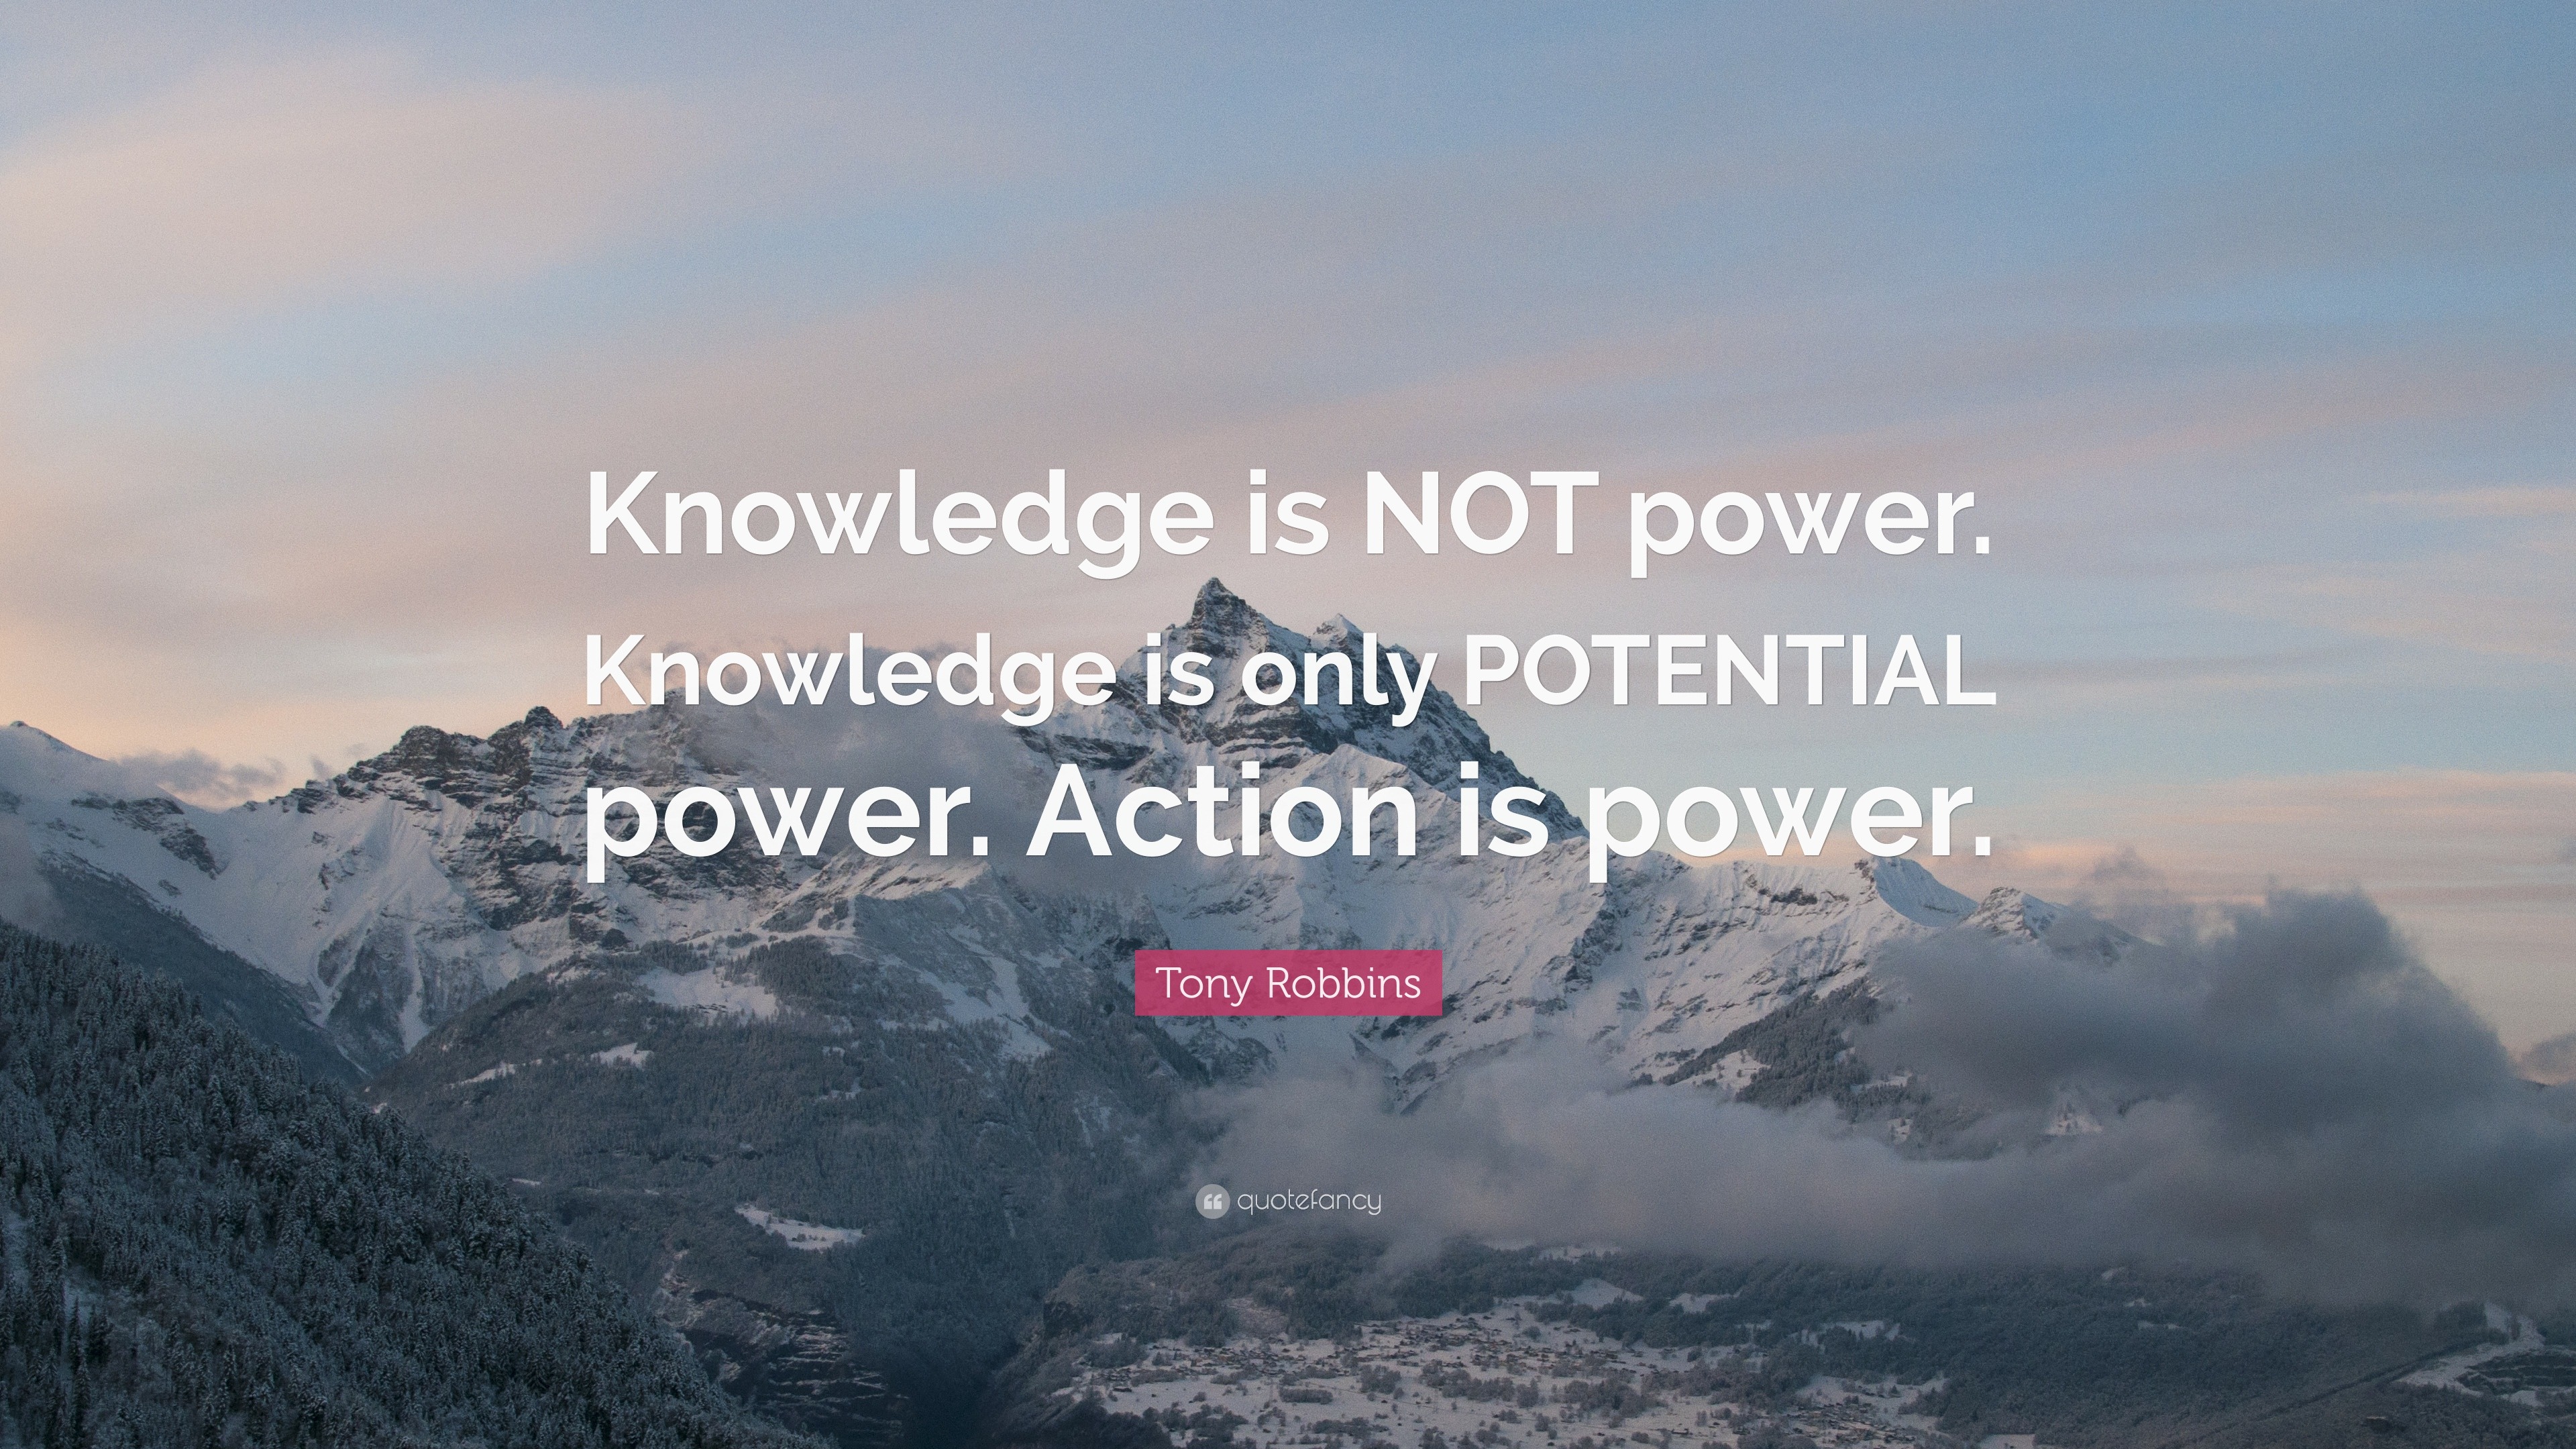 Tony Robbins Quote: “Knowledge is NOT power. Knowledge is only